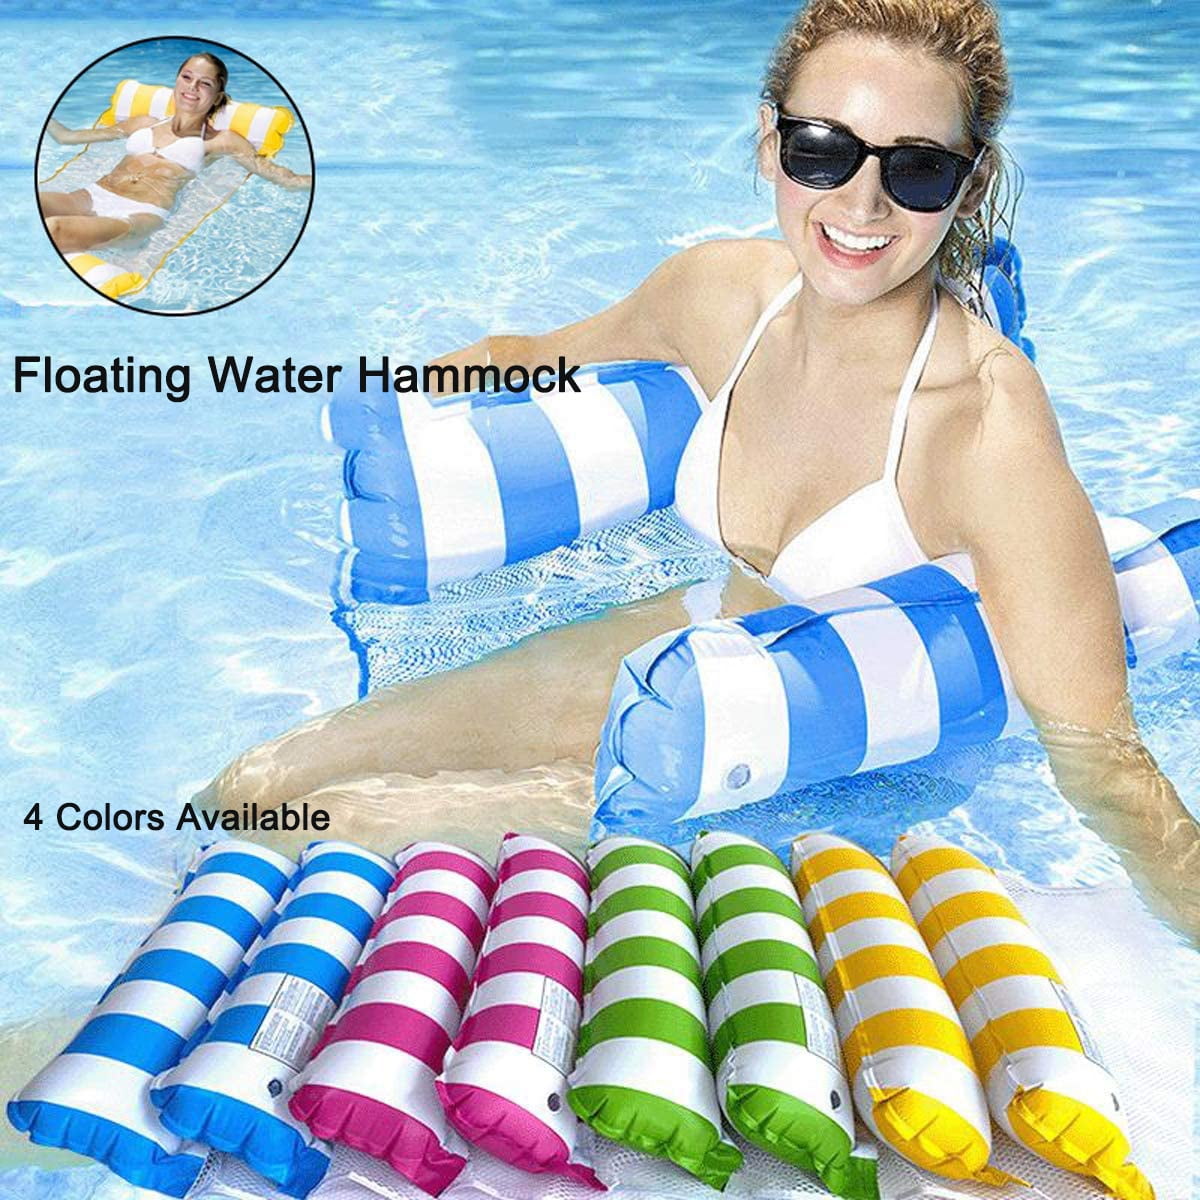 Floating Leisure Hammock Chair &MORE Inflatable Water Hammock Bed Aqua Lounger 